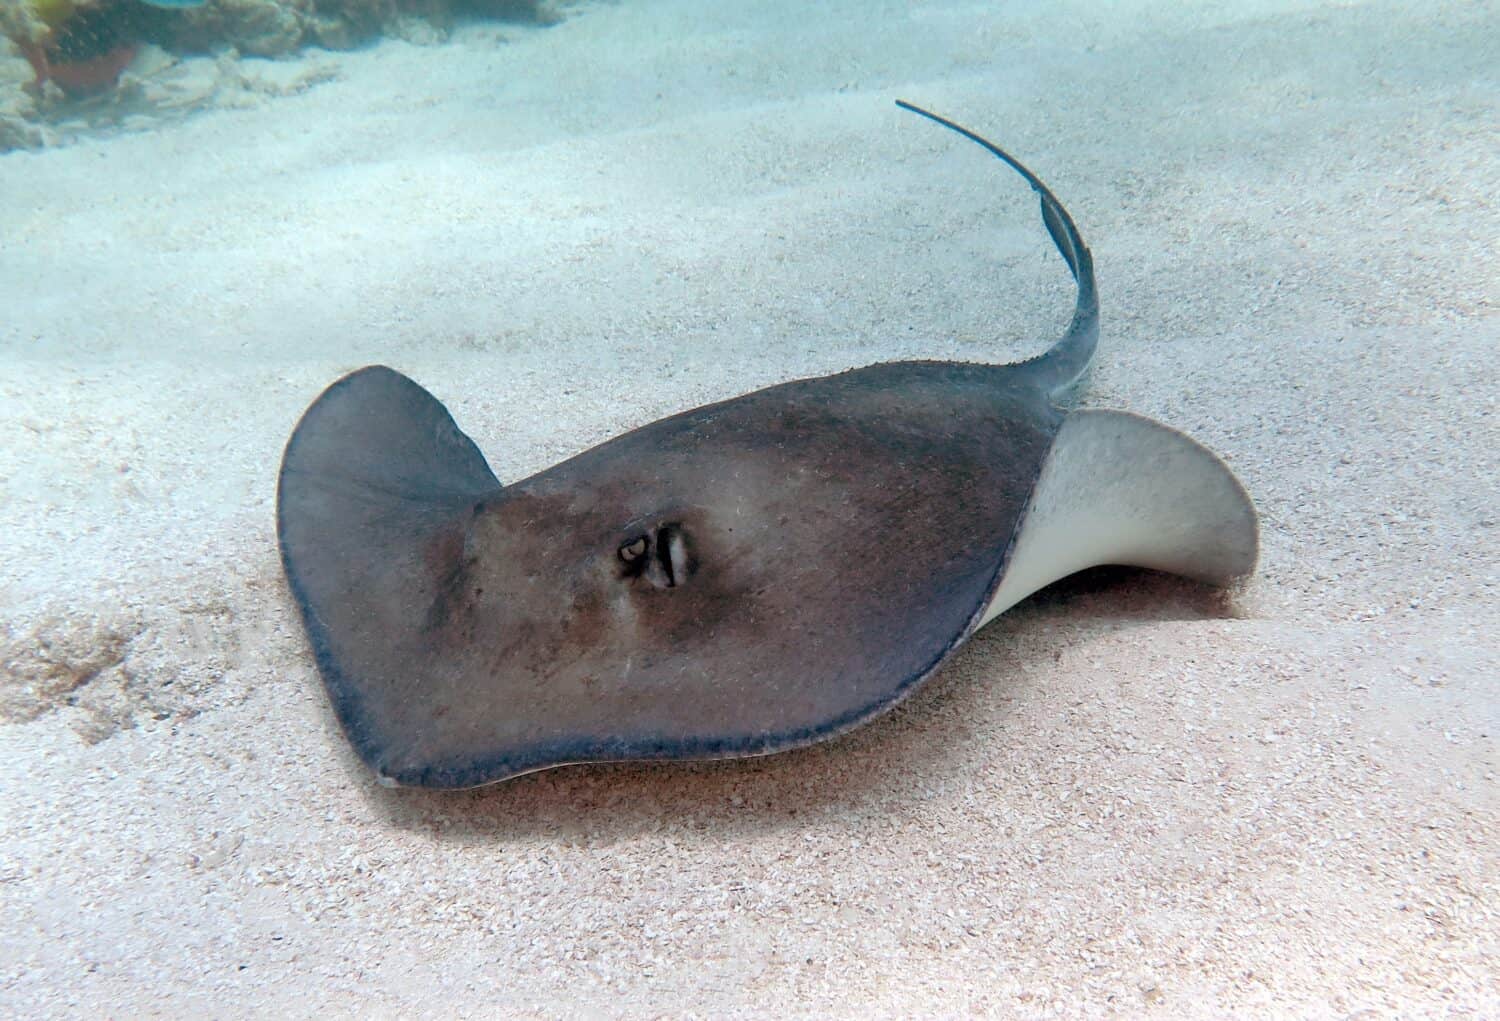 Southern Stingray in the Tropical Western Atlantic